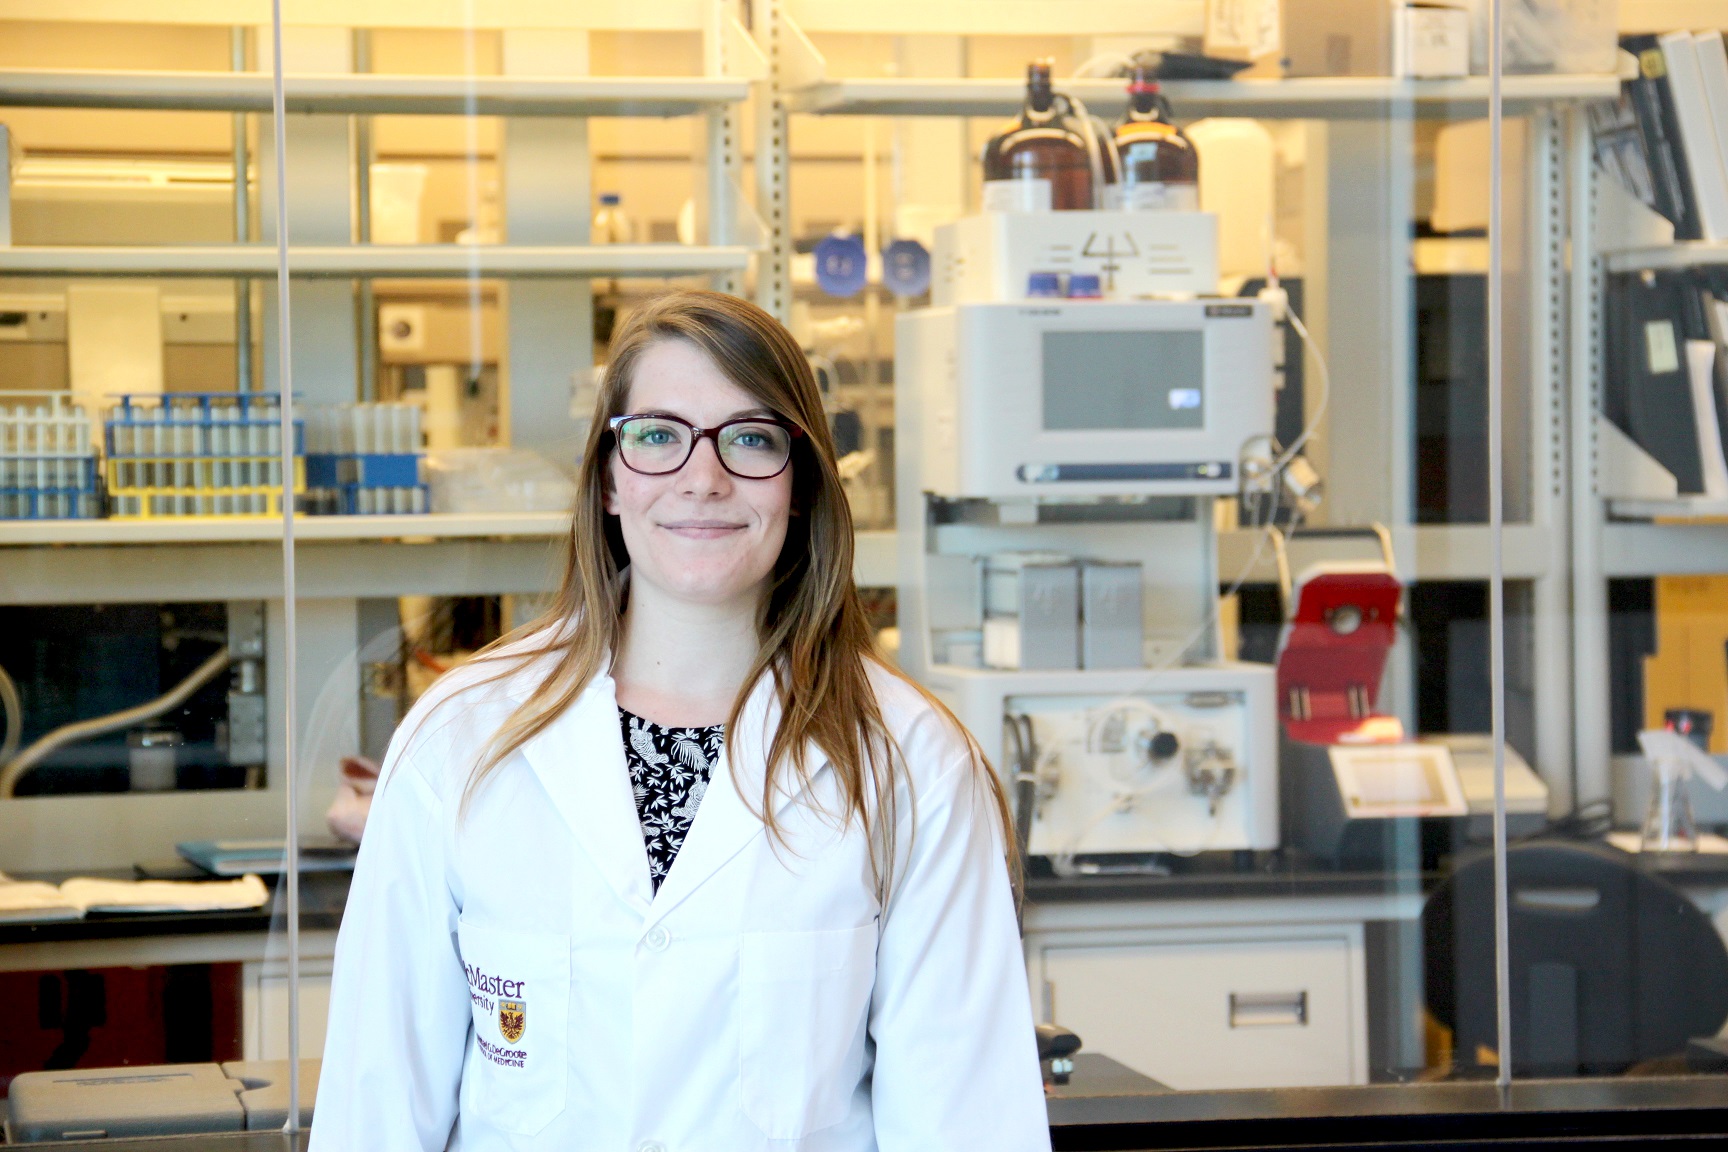 Allison Guitor in her lab at McMaster University.